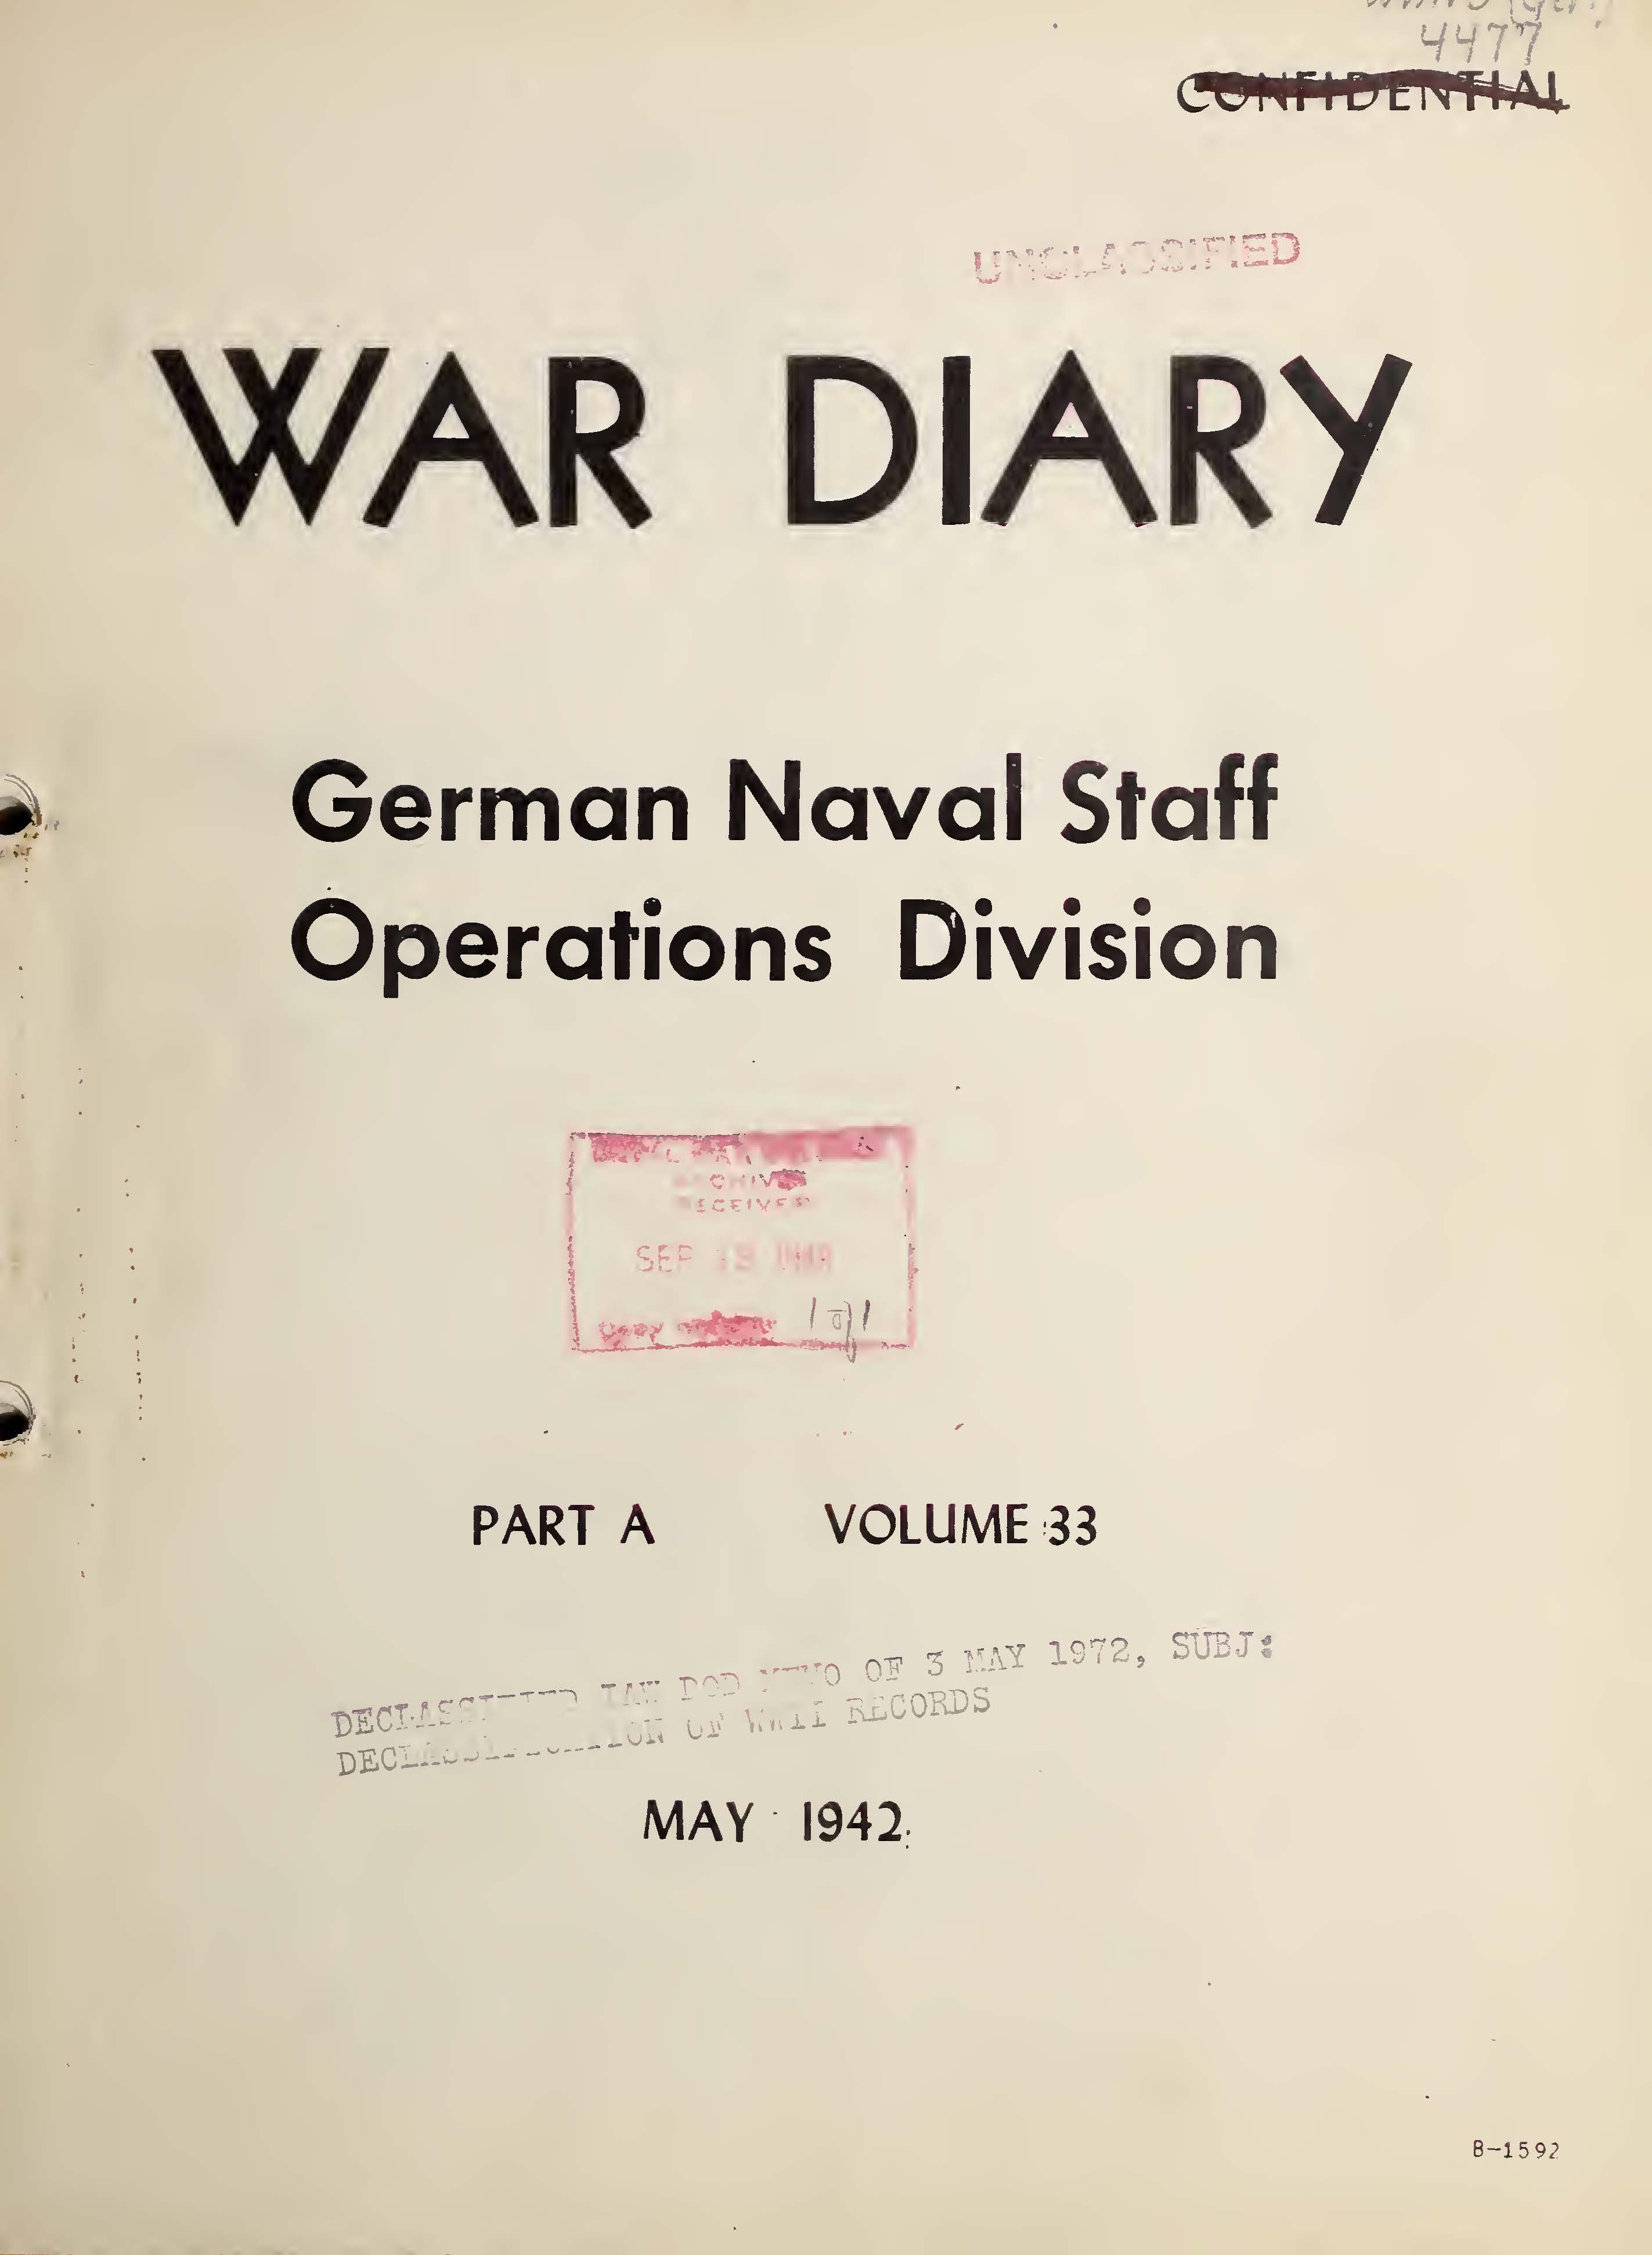 War Diary of German Naval Staff (Operations Division) Part A, Volume 33, May 1942